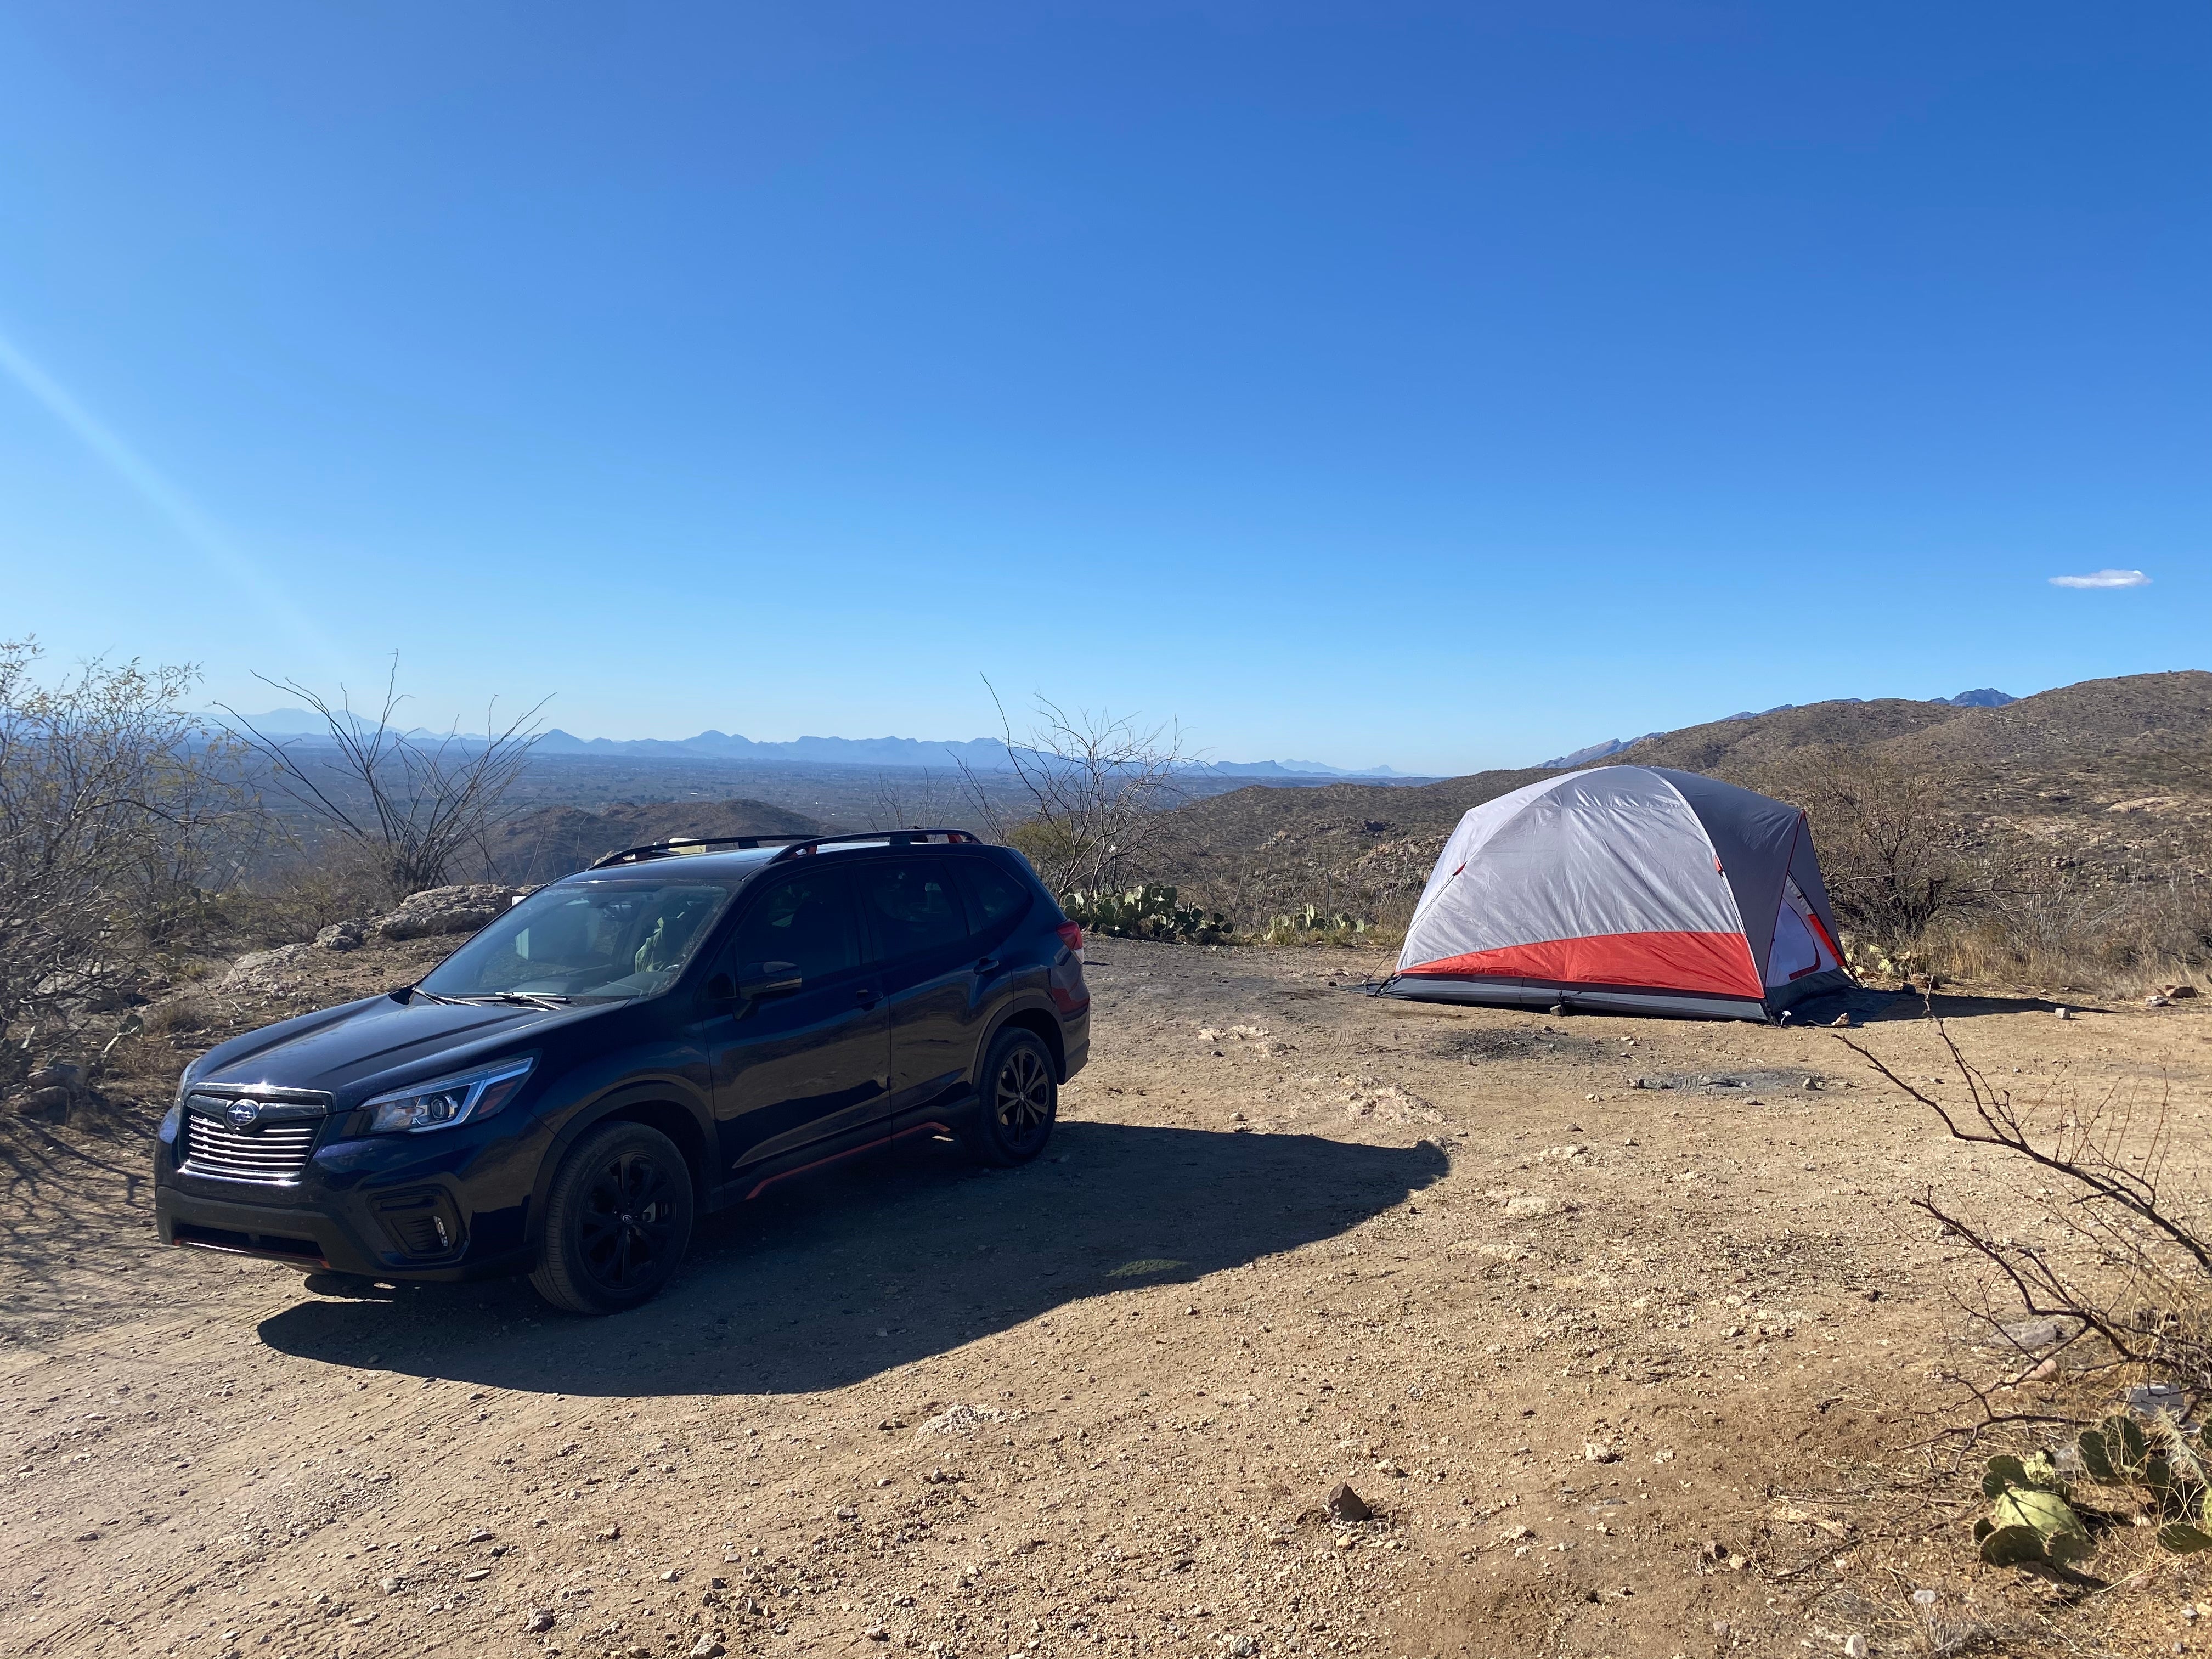 Camper submitted image from Redington Pass - Dispersed Camping - 4